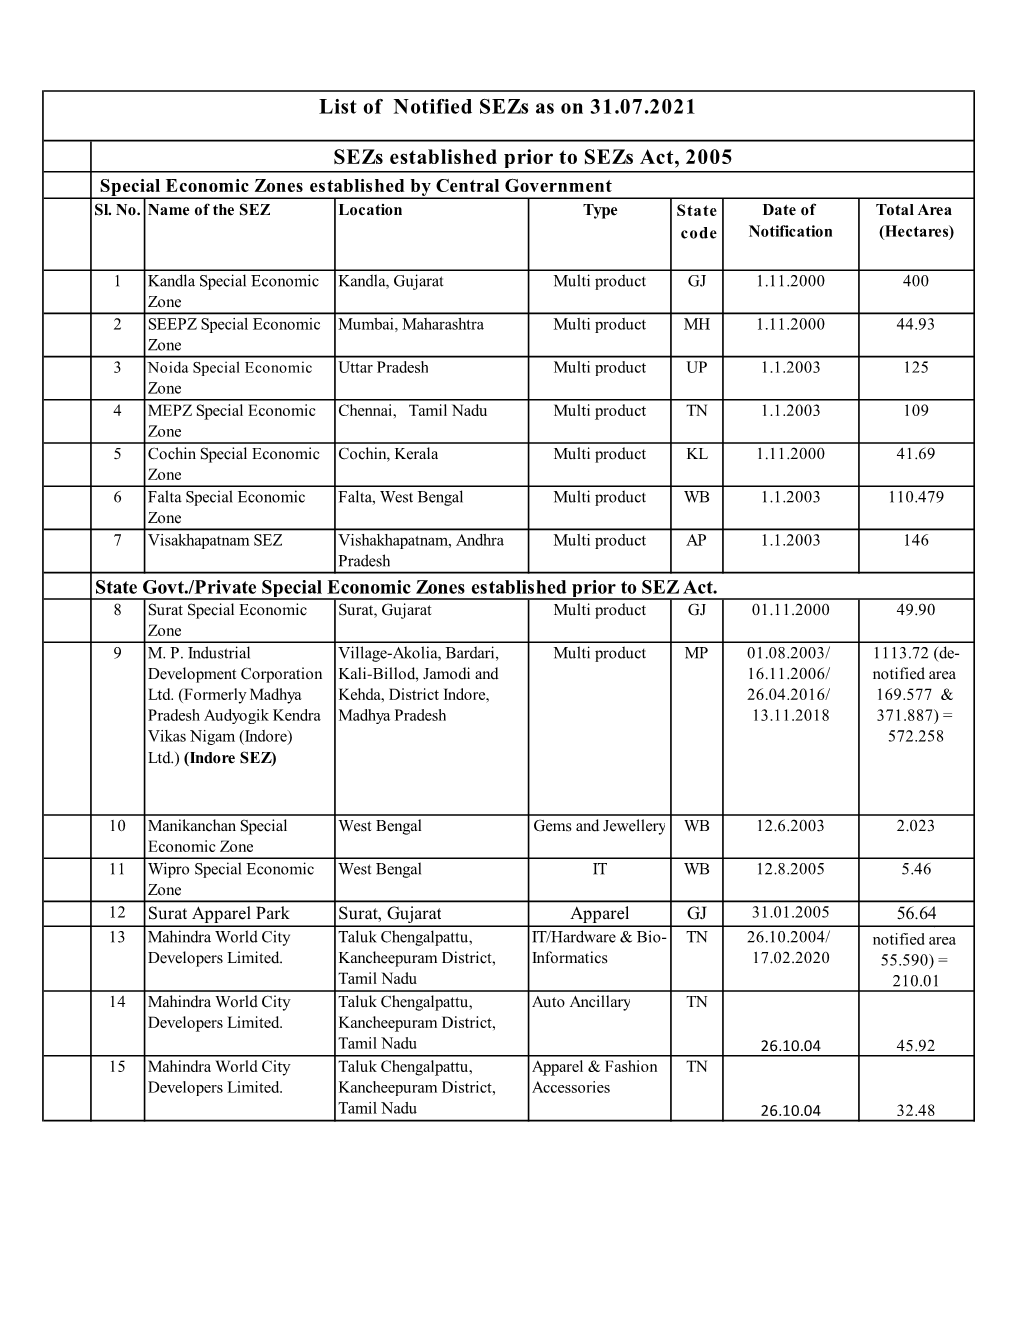 List of Notified Sezs As on 31.07.2021 Sezs Established Prior